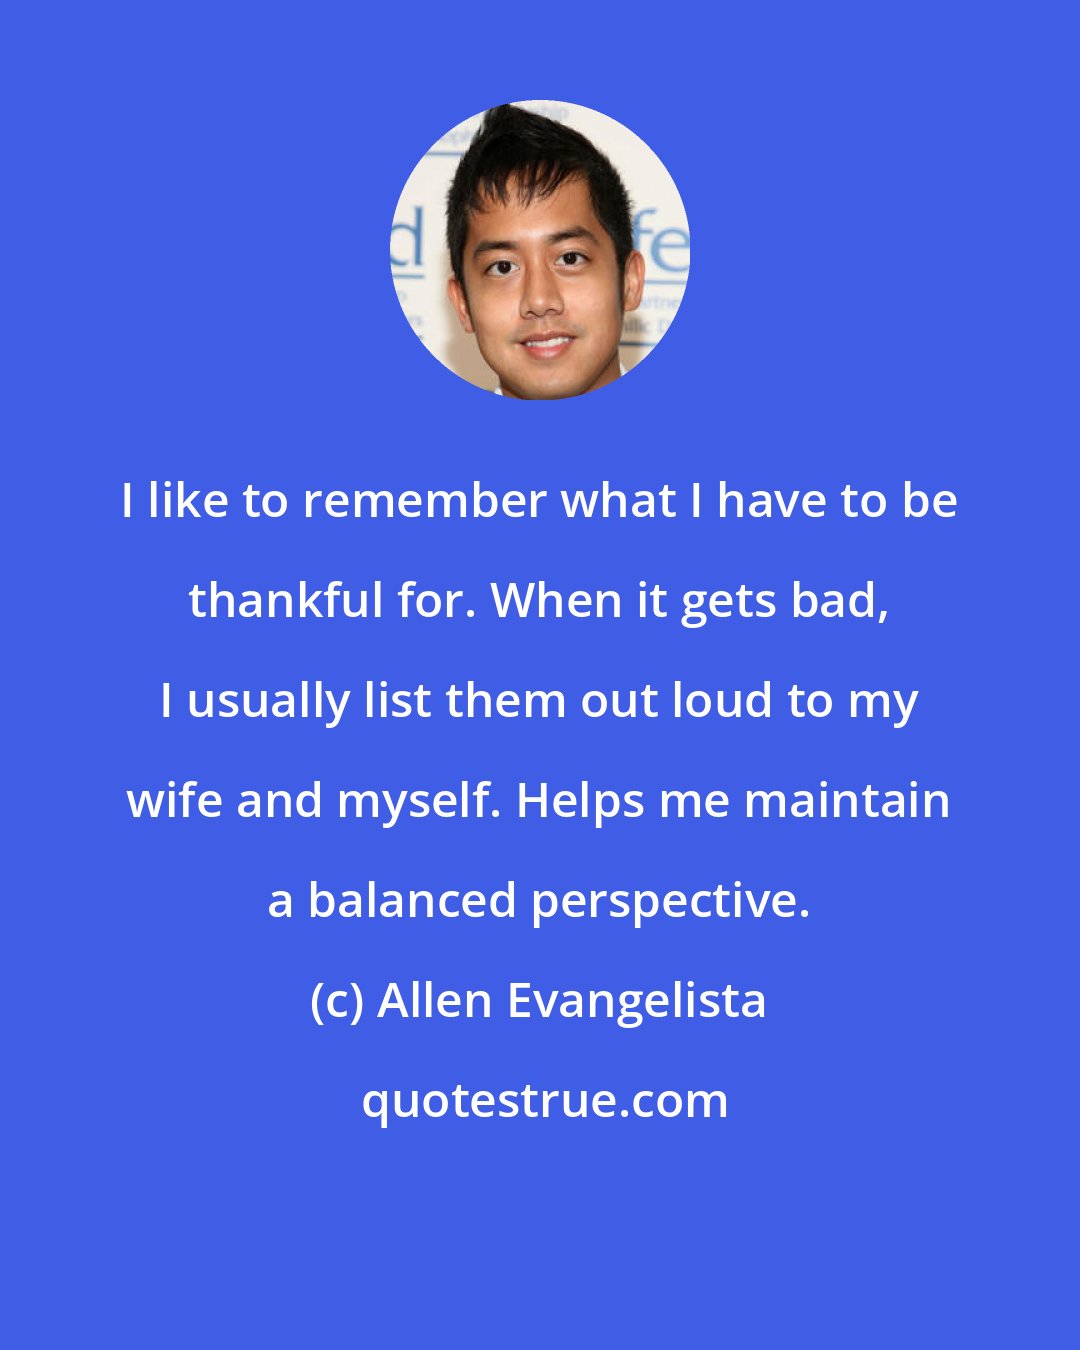 Allen Evangelista: I like to remember what I have to be thankful for. When it gets bad, I usually list them out loud to my wife and myself. Helps me maintain a balanced perspective.